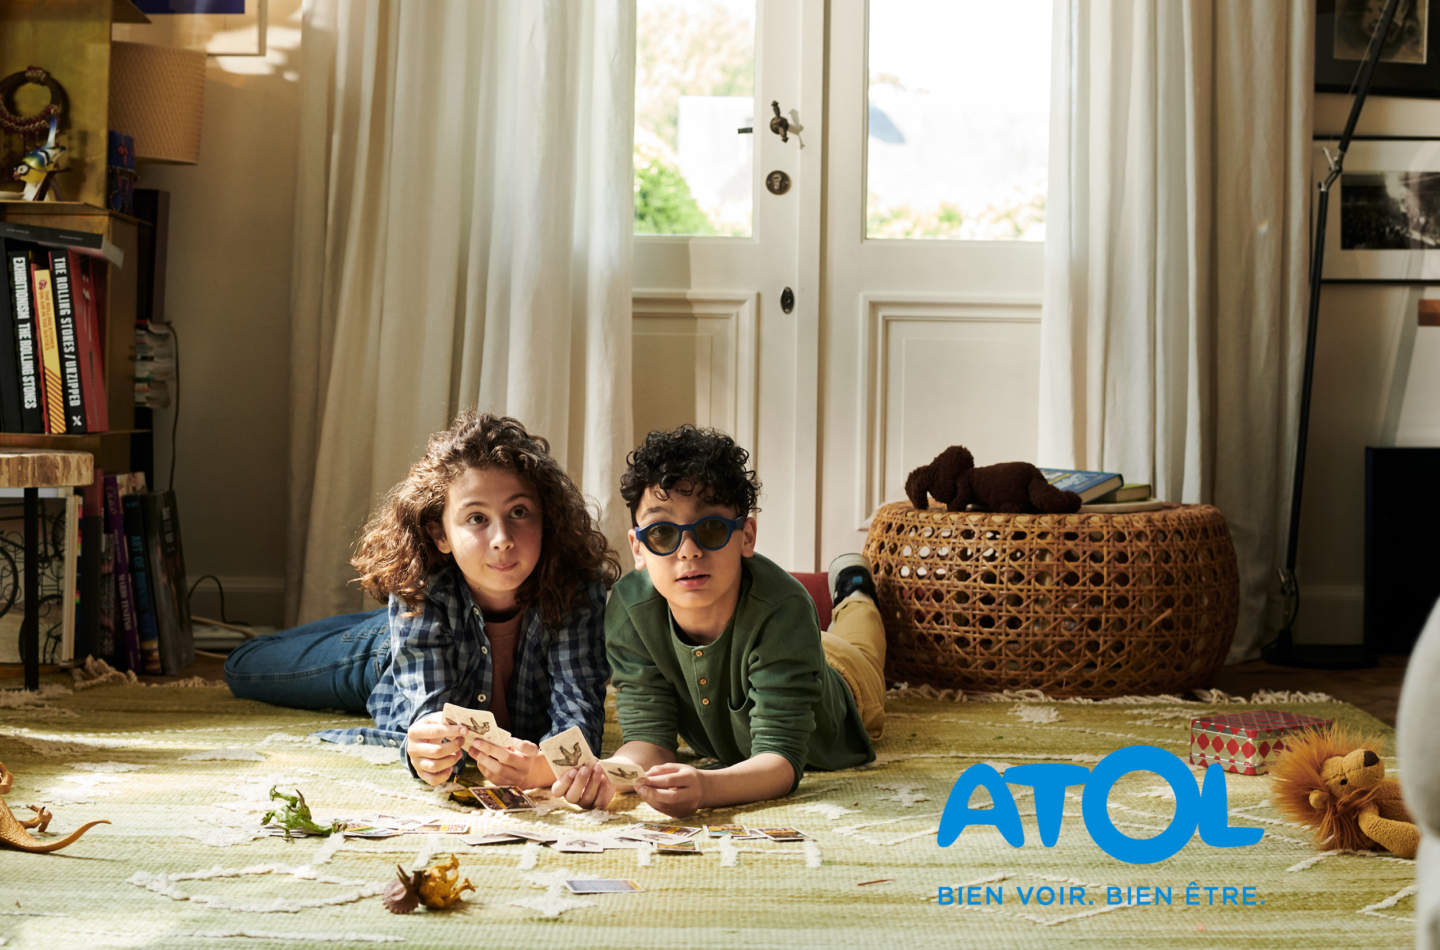 Fergus Padel - Print Campaign for ATOL | Soothing Shade – Photography Agency Berlin